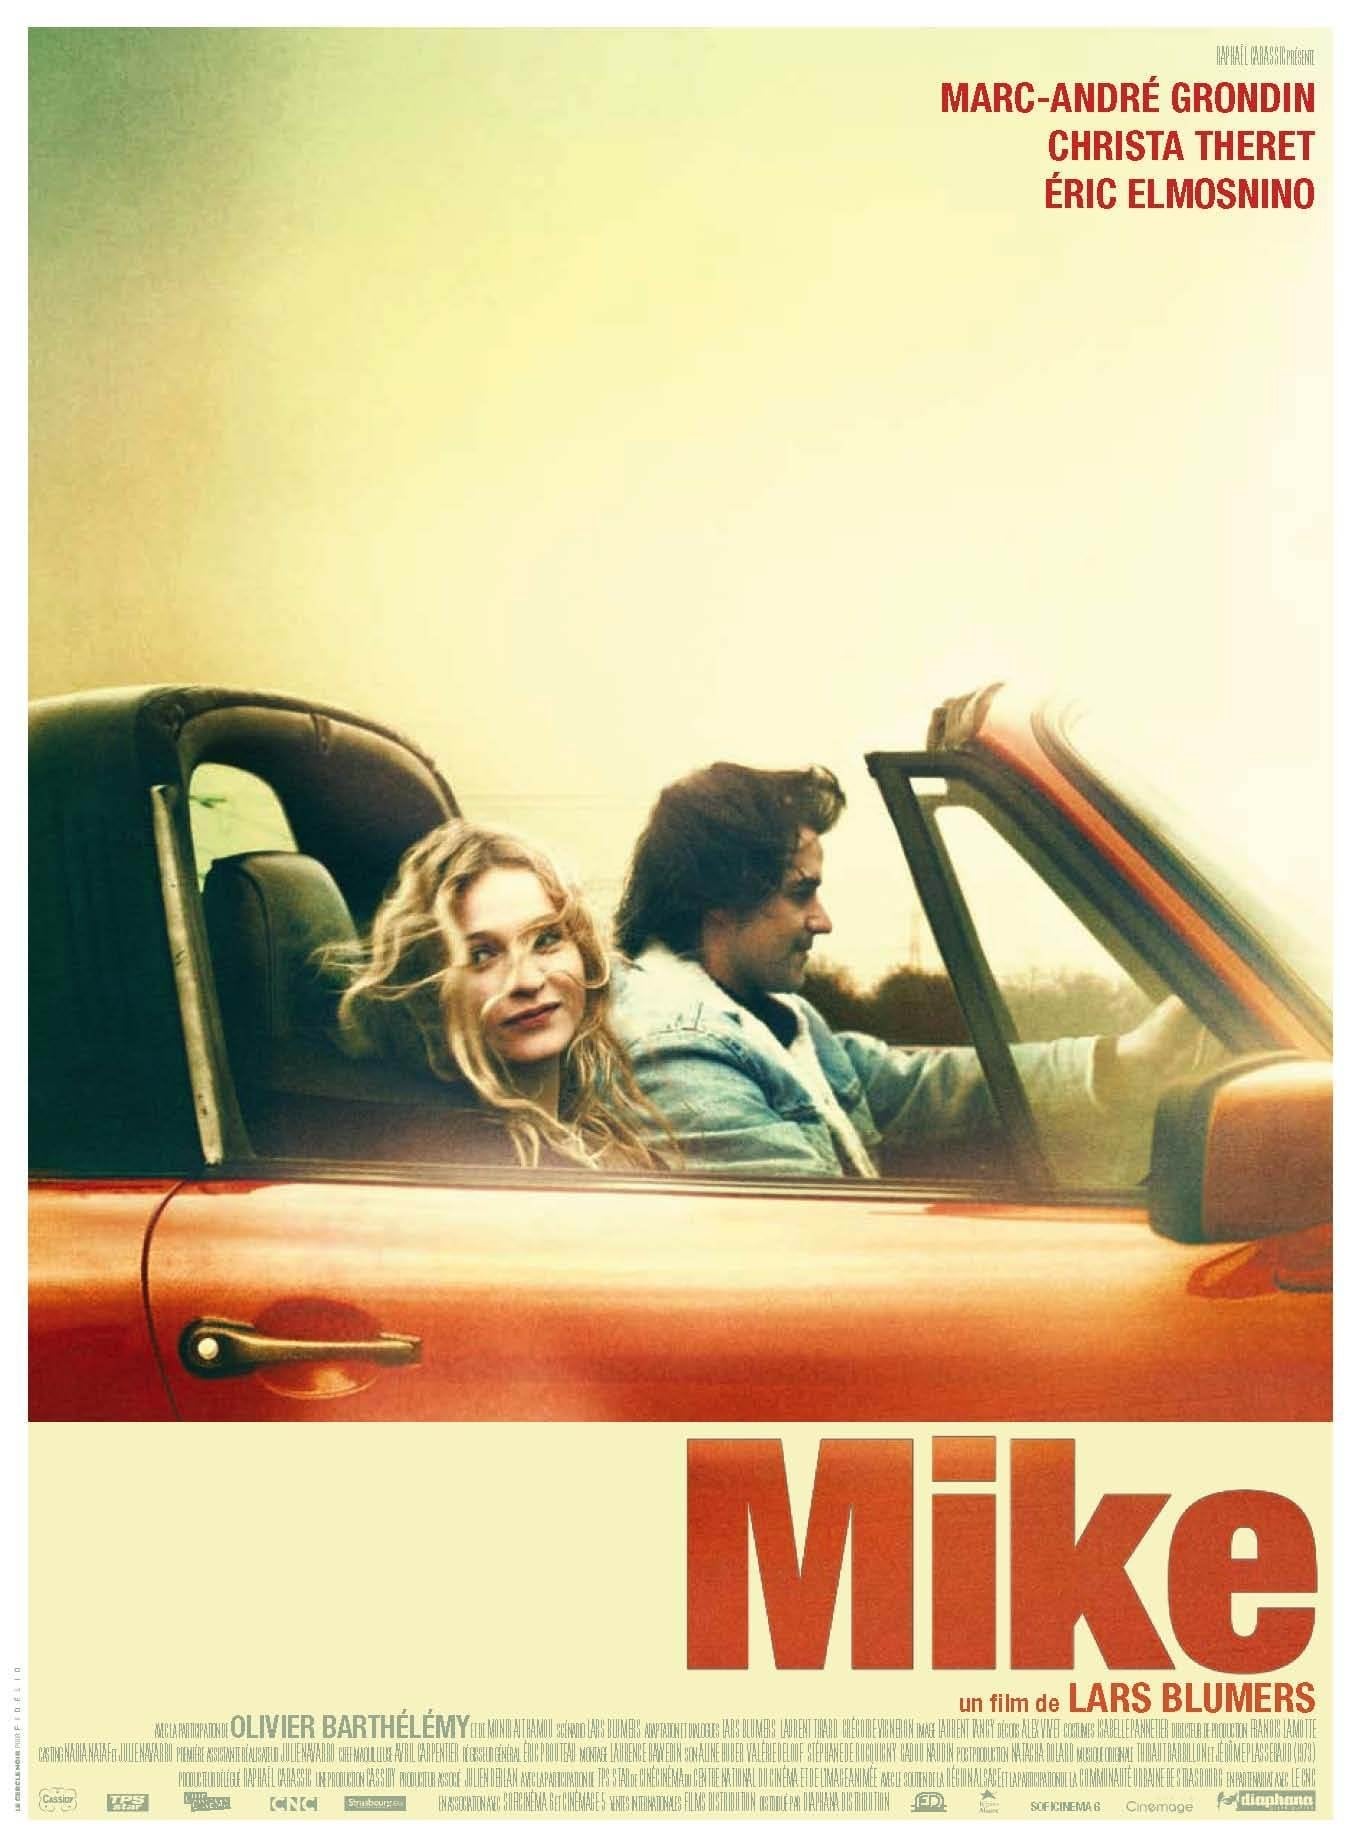 Mike (2011)